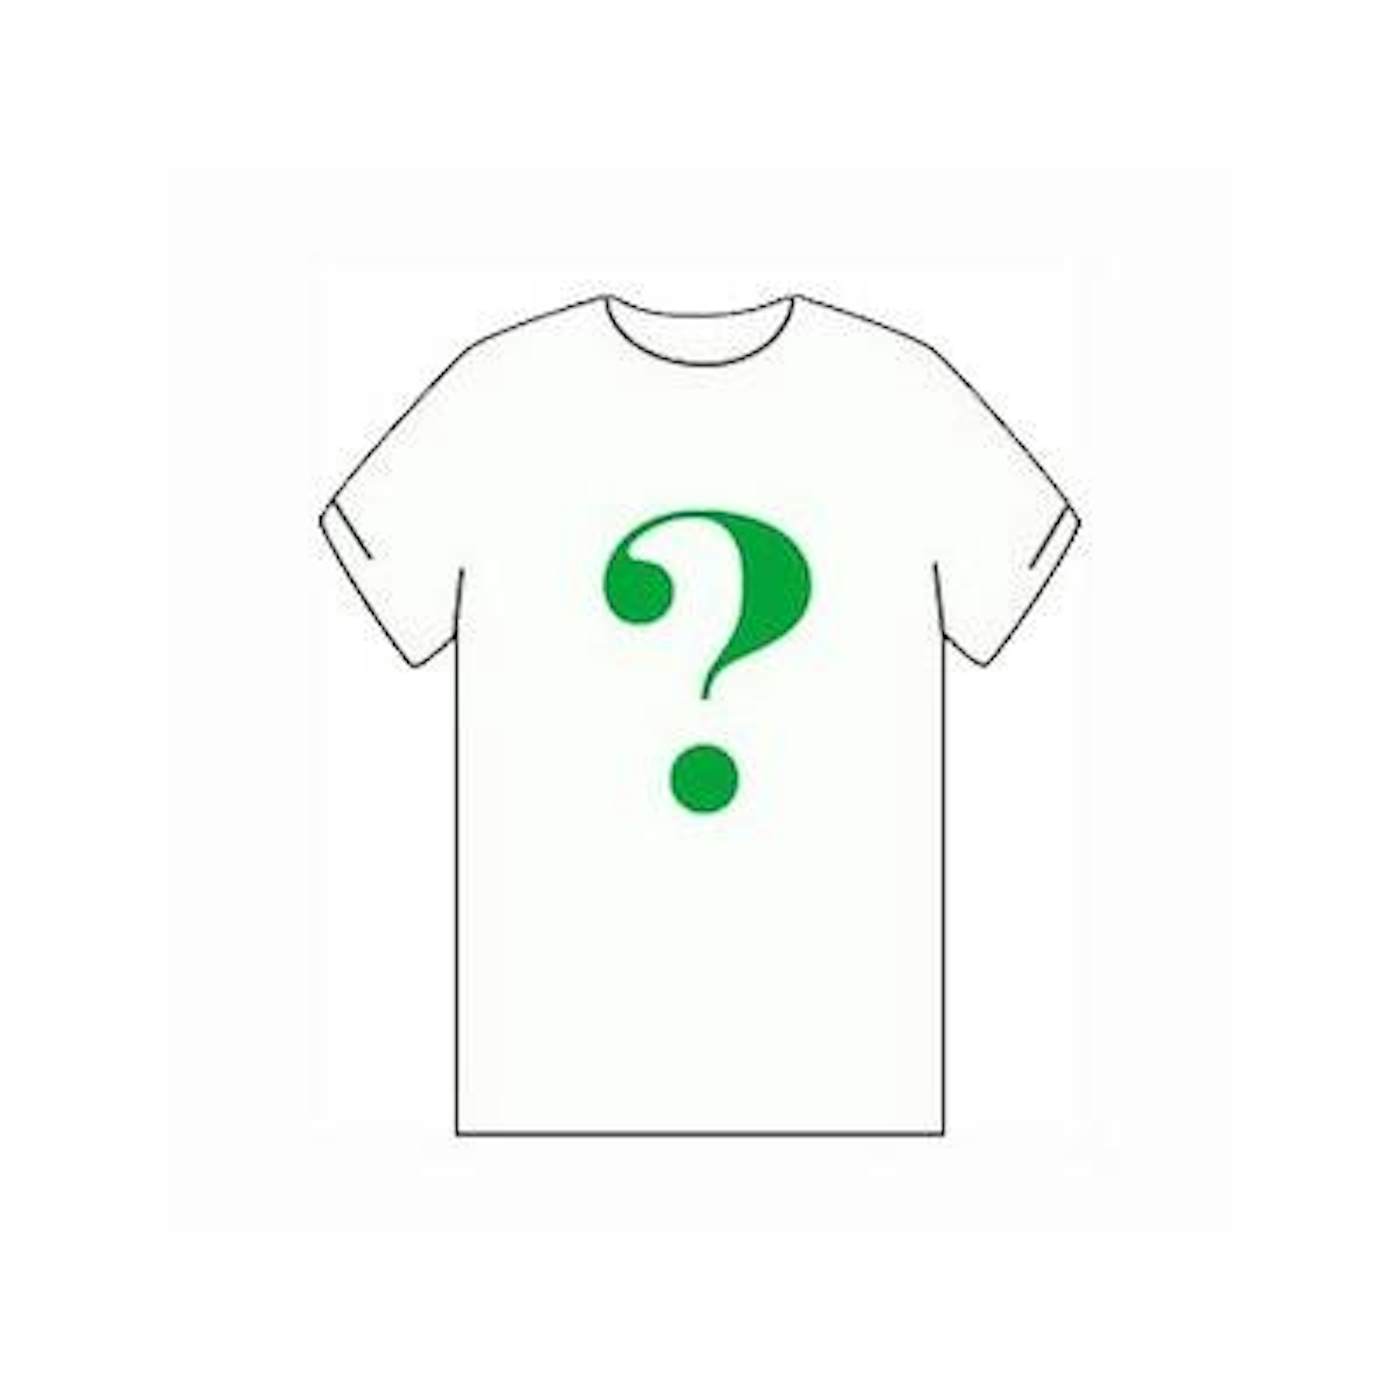 OK Go - "Don't Ask Me" Mystery Shirt